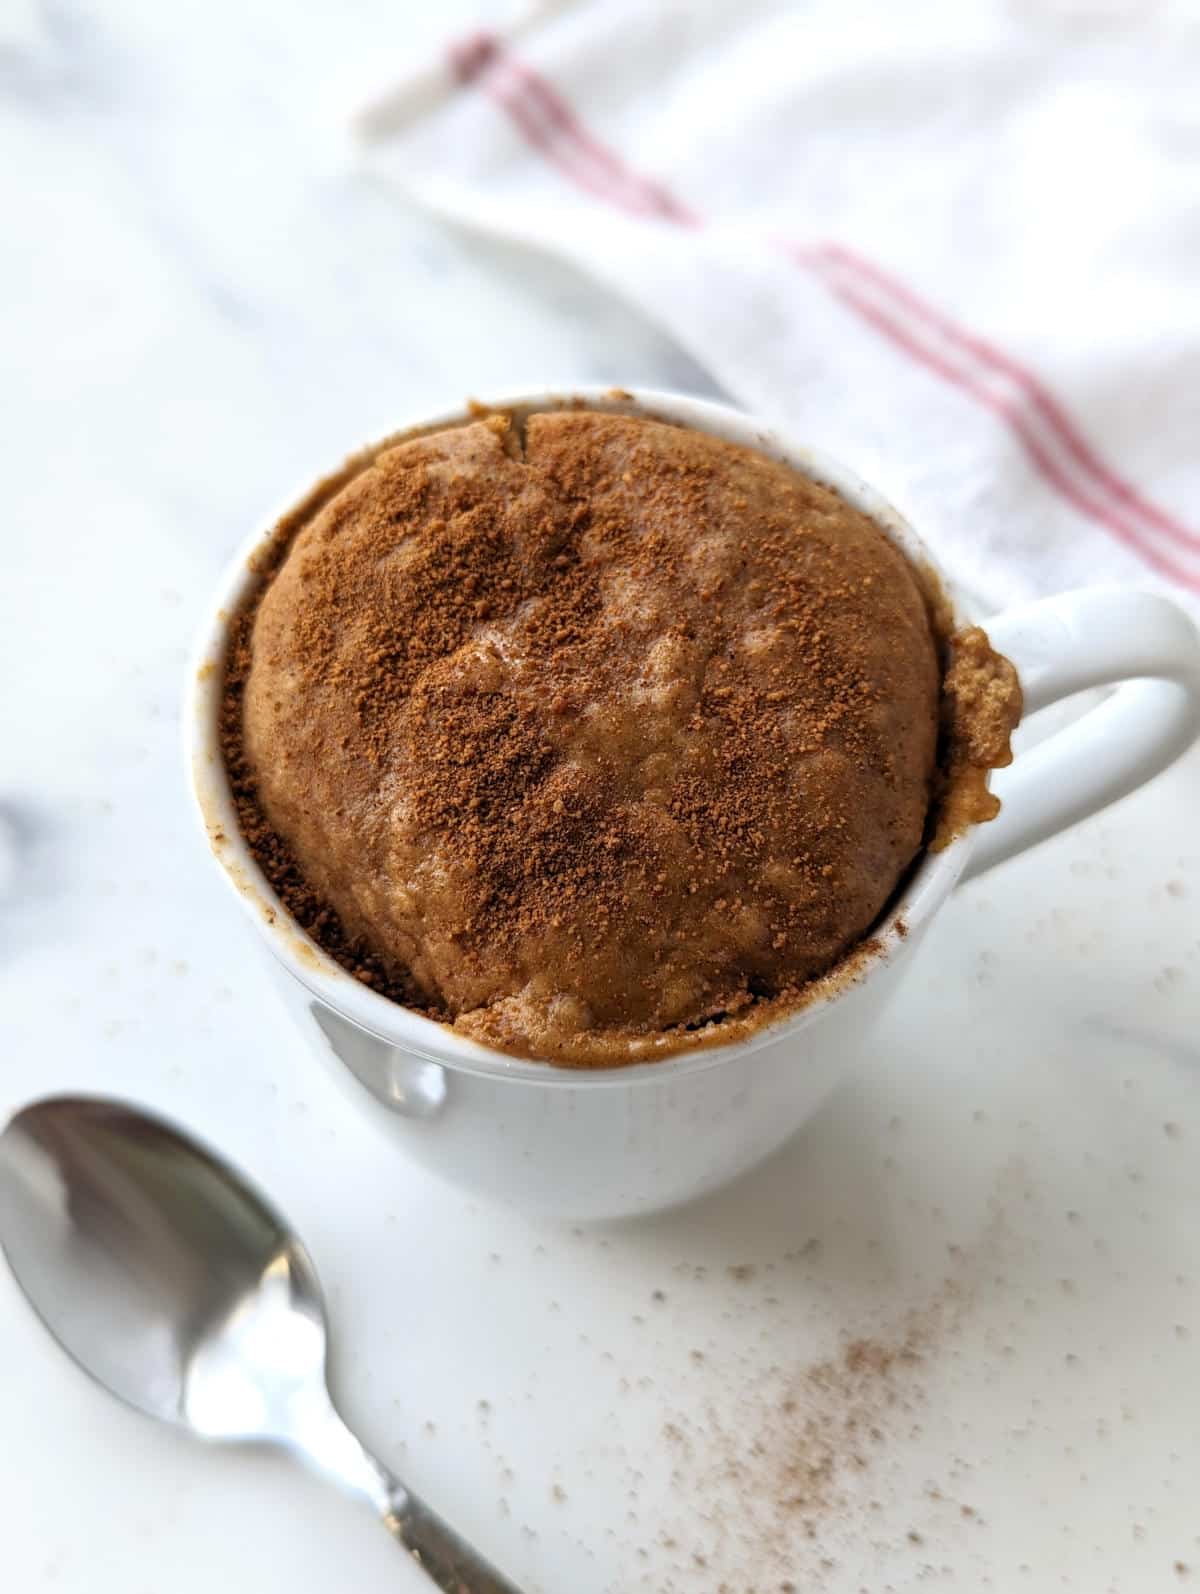 Baked snickerdoodle mug cake after microwaving, topped with cinnamon sugar.